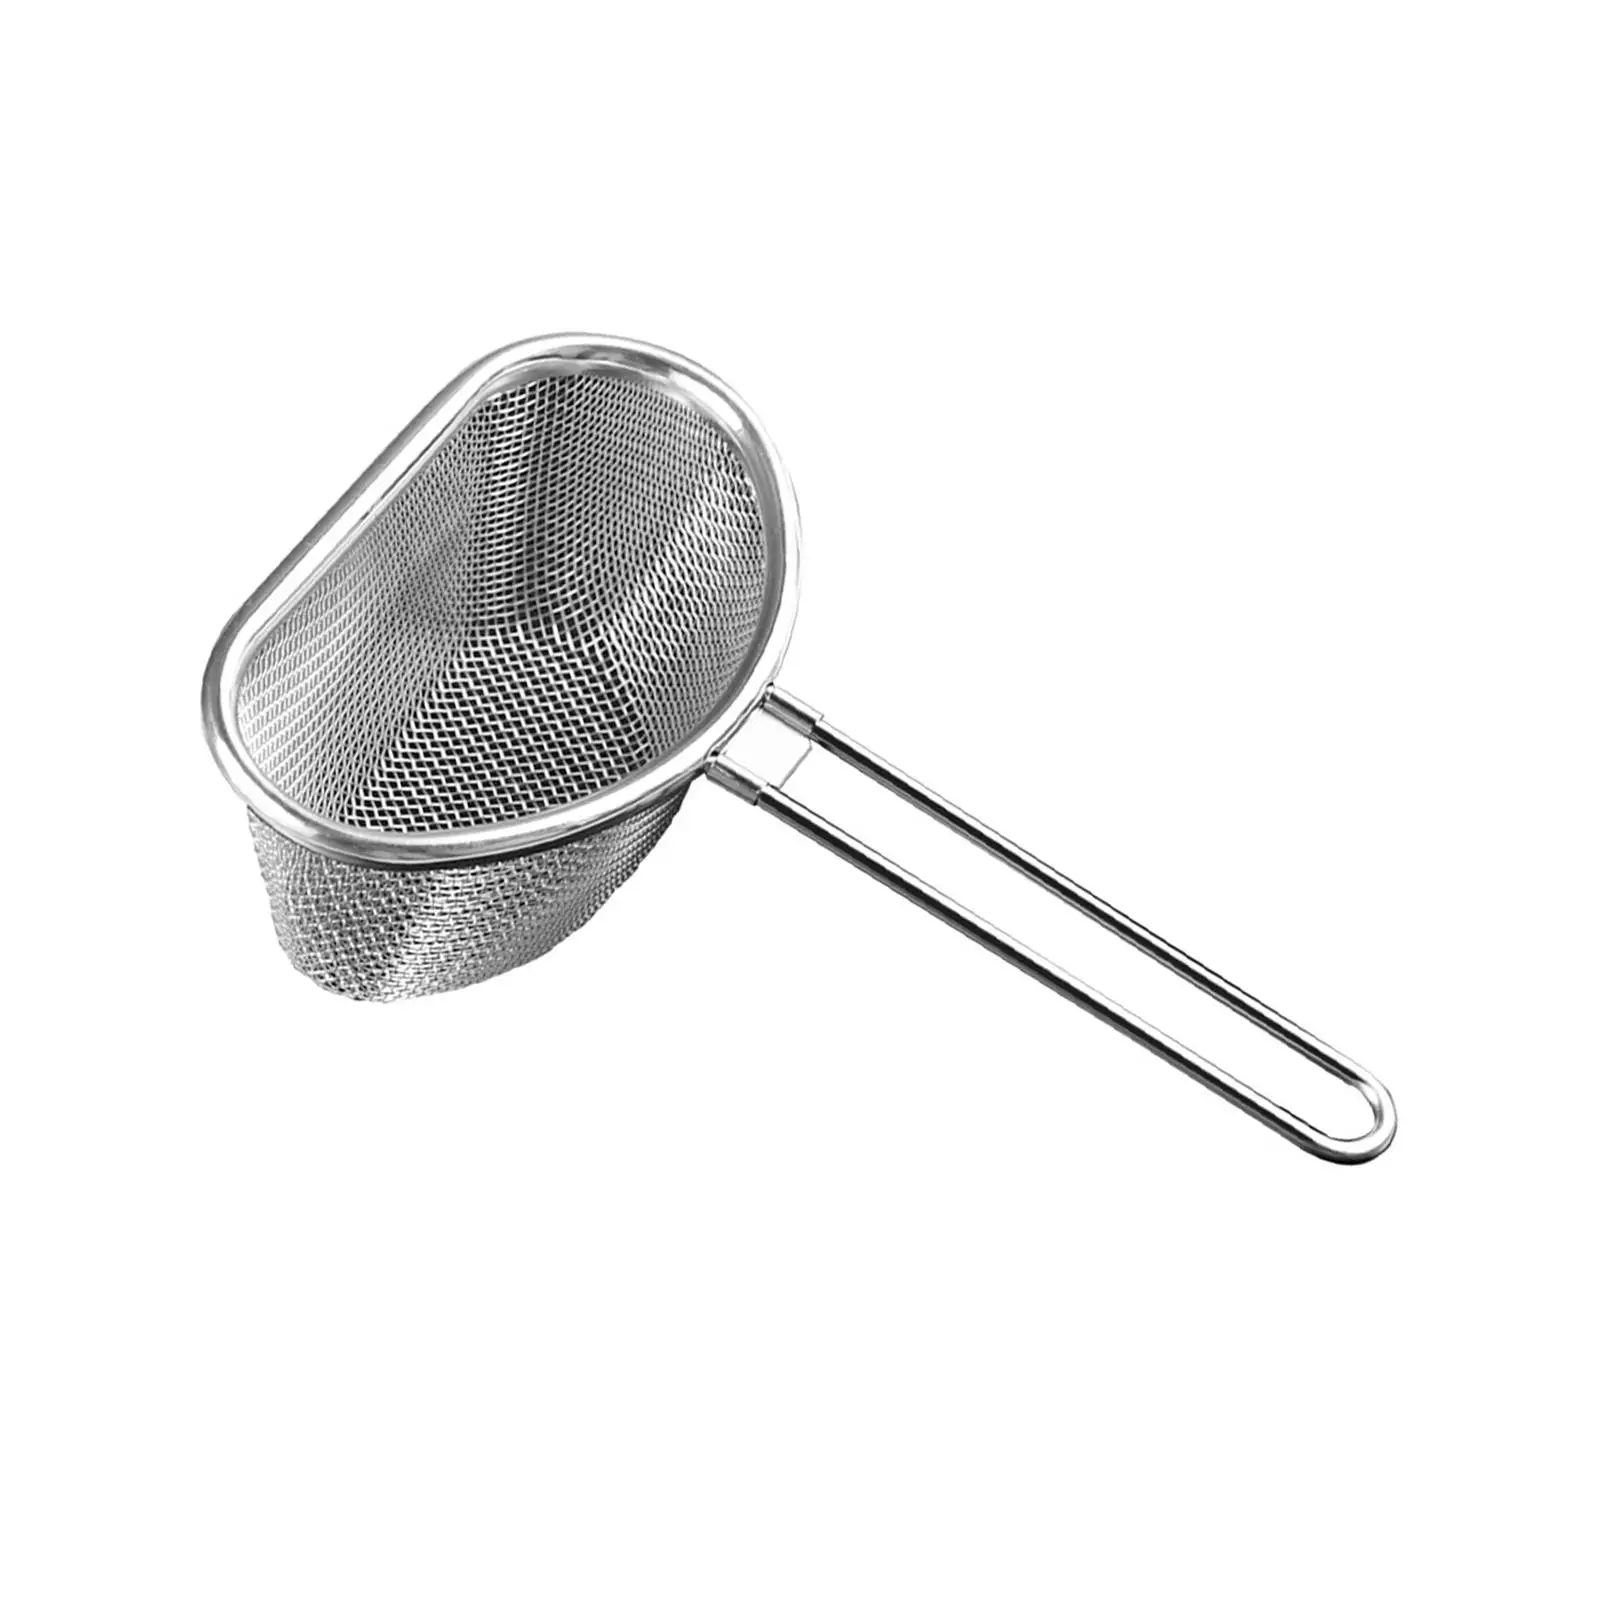 Mesh Strainer Stainless Steel Fry Basket Filter Mesh Sieve Noodle Strainer for Frying noodles Kitchen Home Accessory